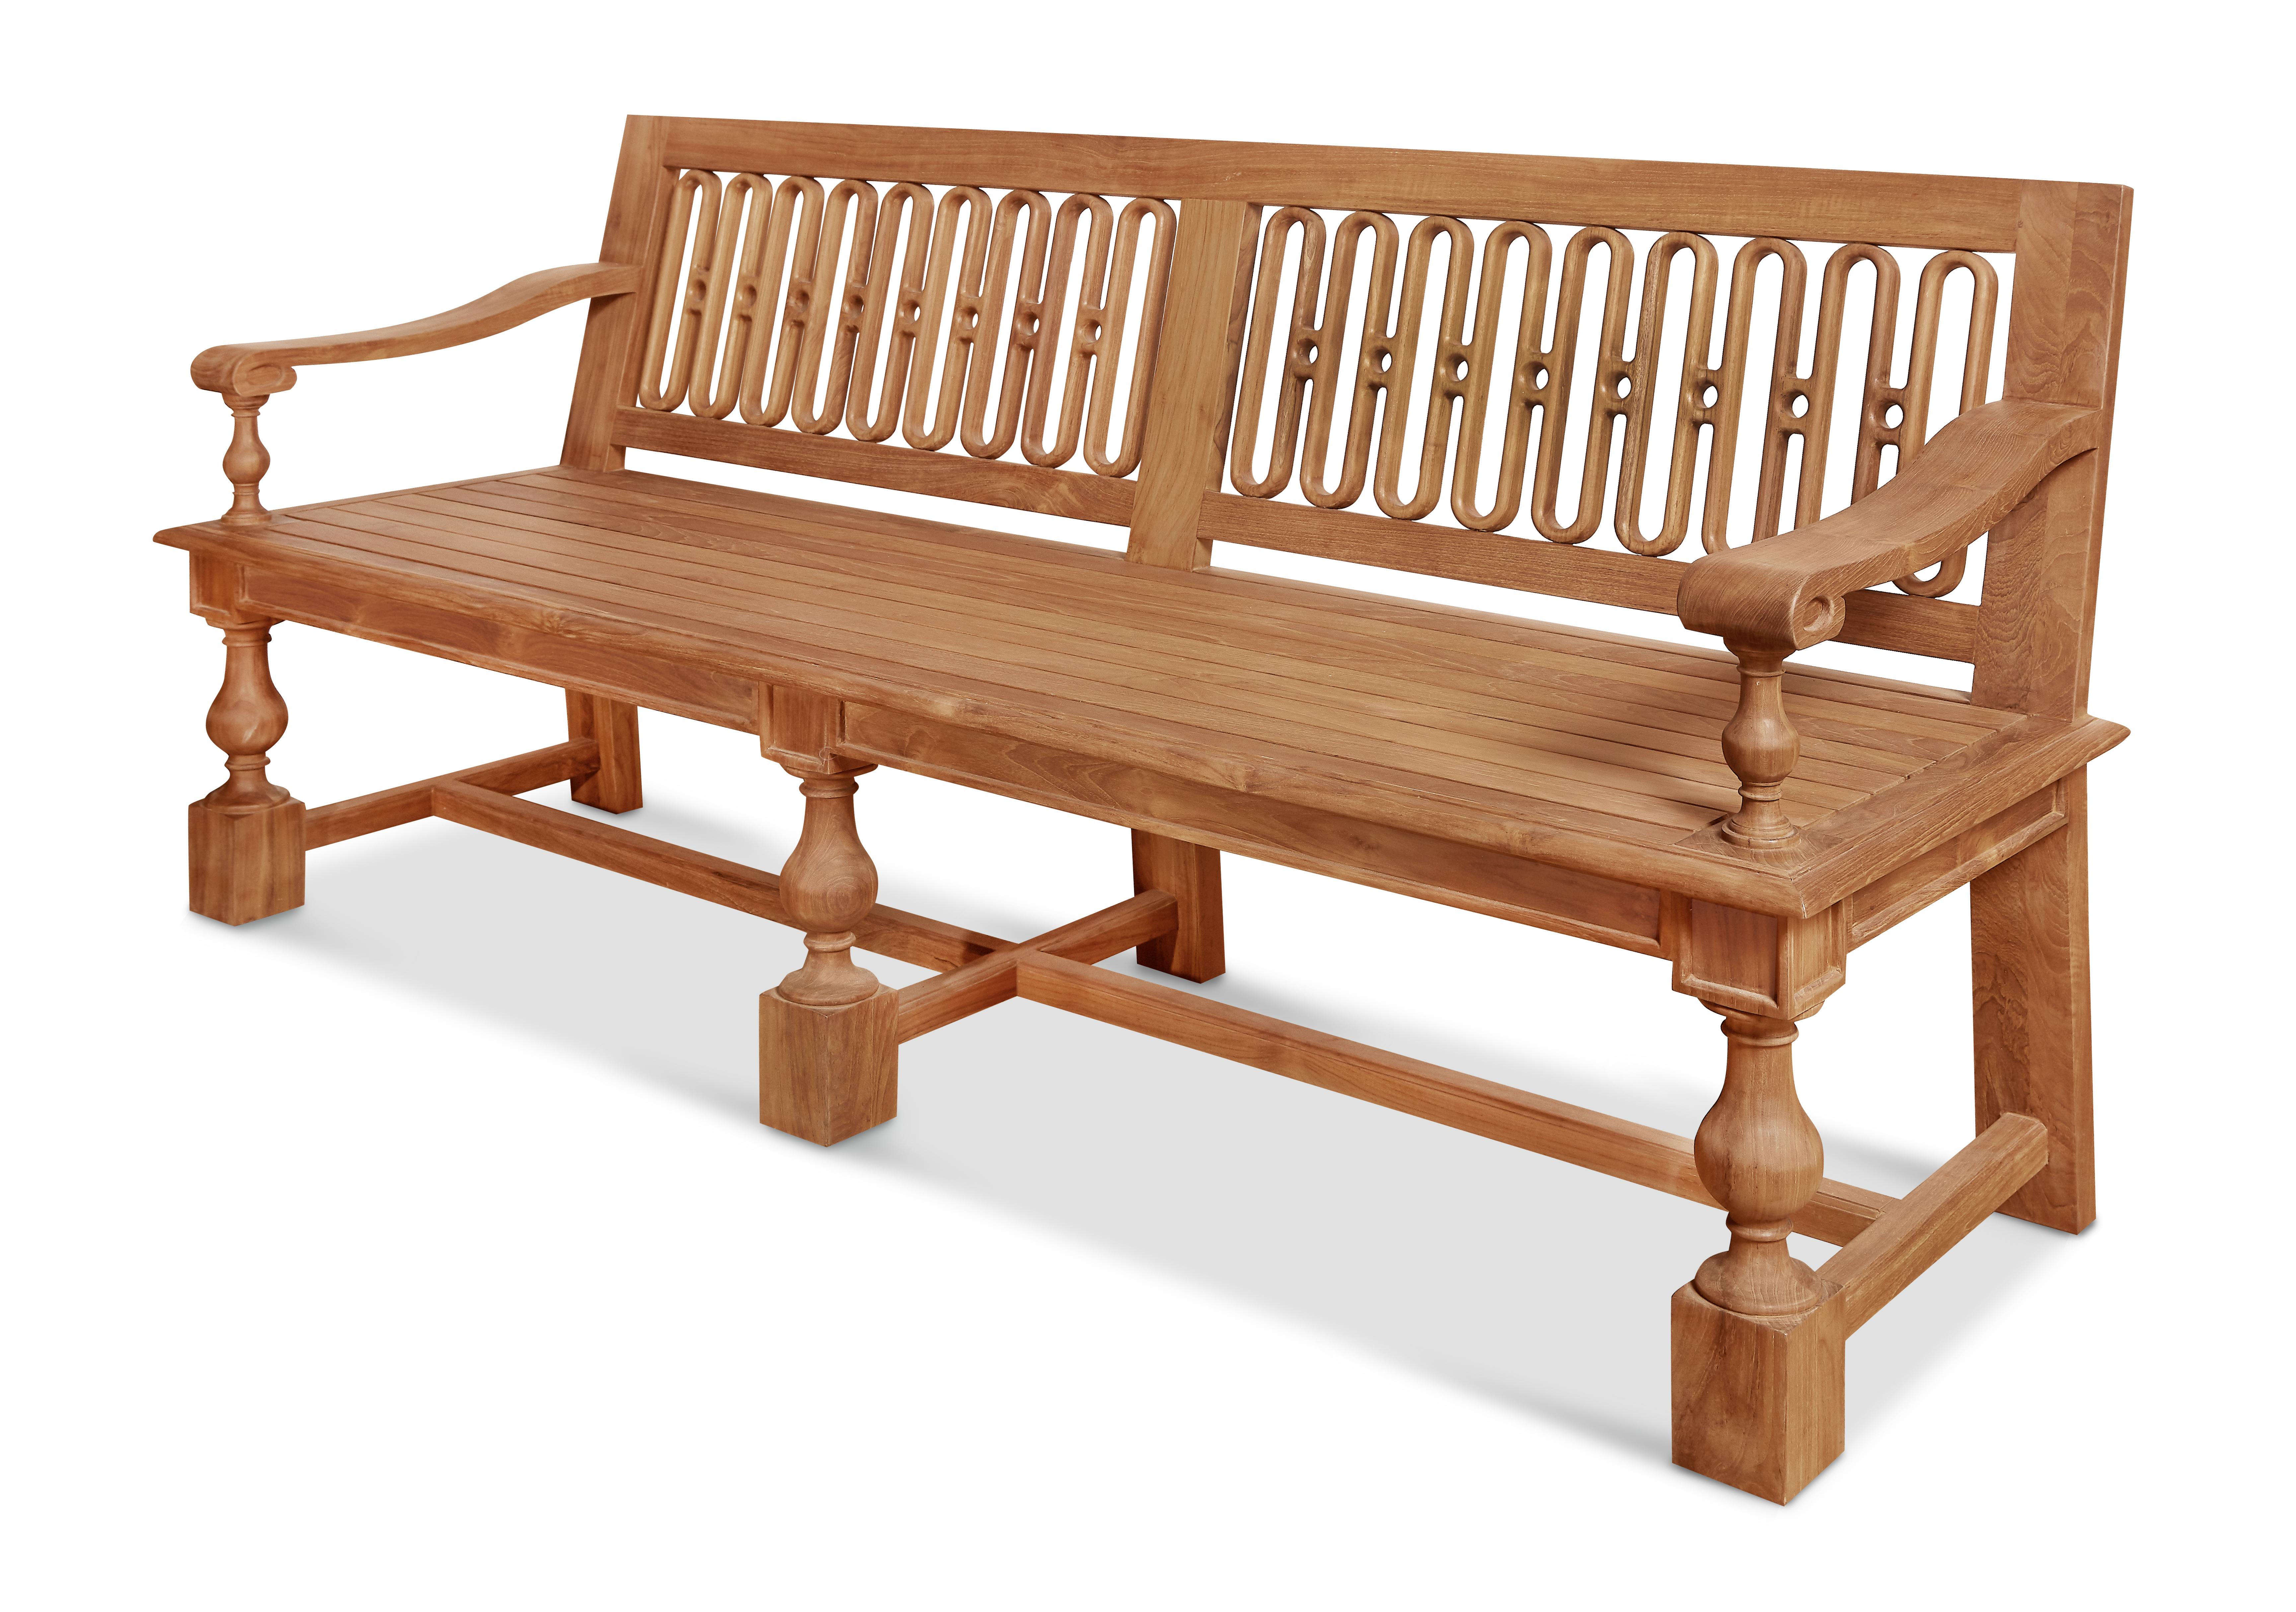 Our Kingston bench is inspired by the artistry of polymath William Kent and the historic benches of Versailles. Rooted in the 18th century but streamlined in teak wood for the 21st, ours incorporates beautifully turned legs, arms and impressive